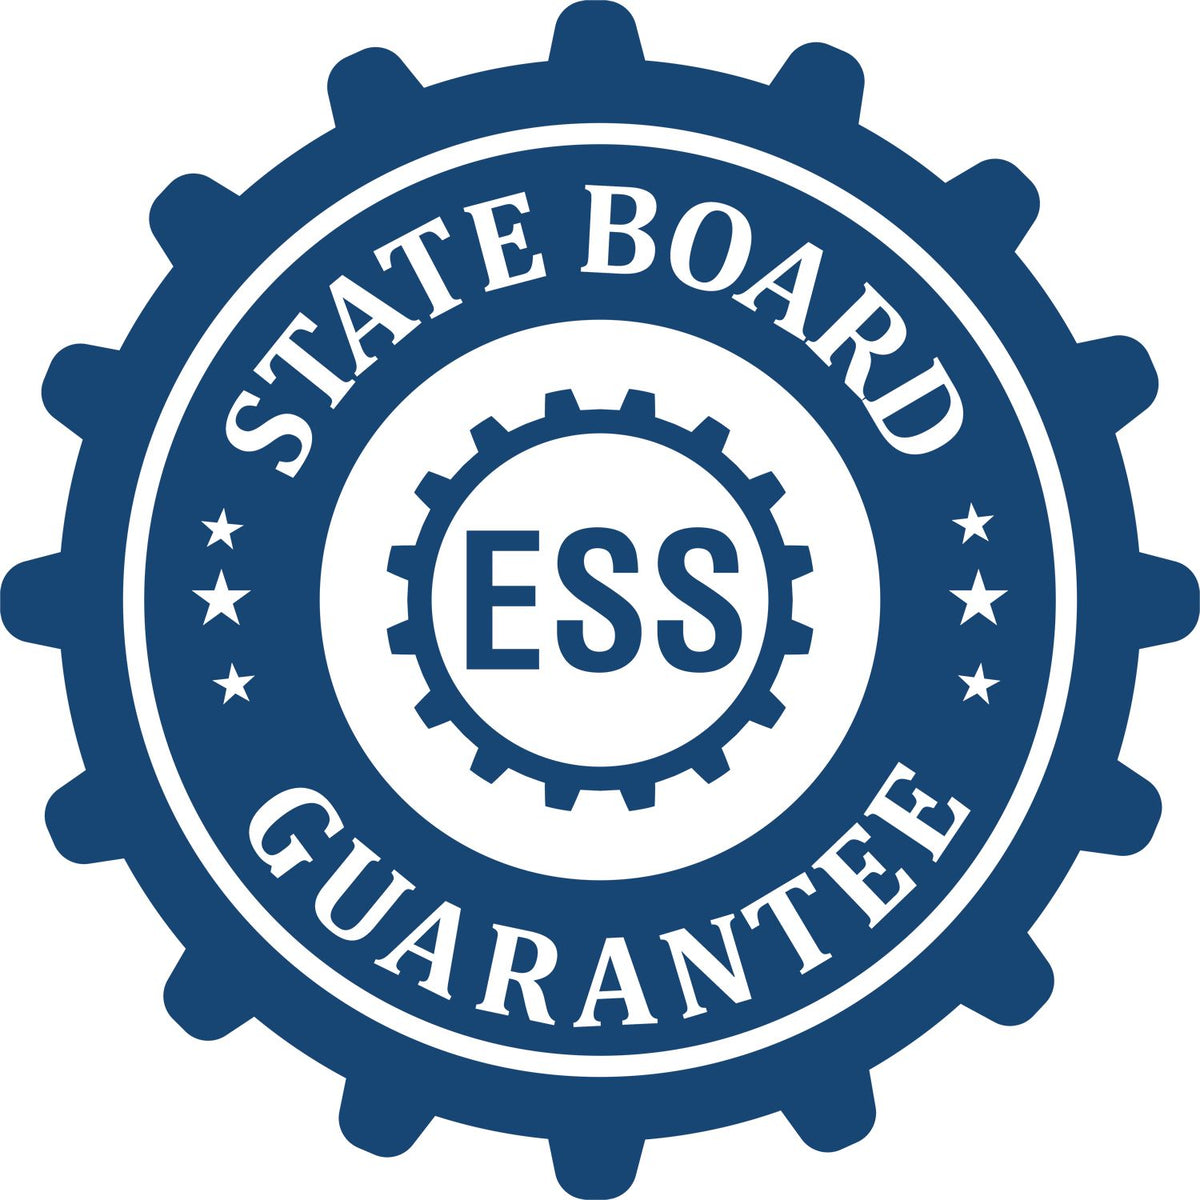 An emblem in a gear shape illustrating a state board guarantee for the Maine Engineer Desk Seal product.